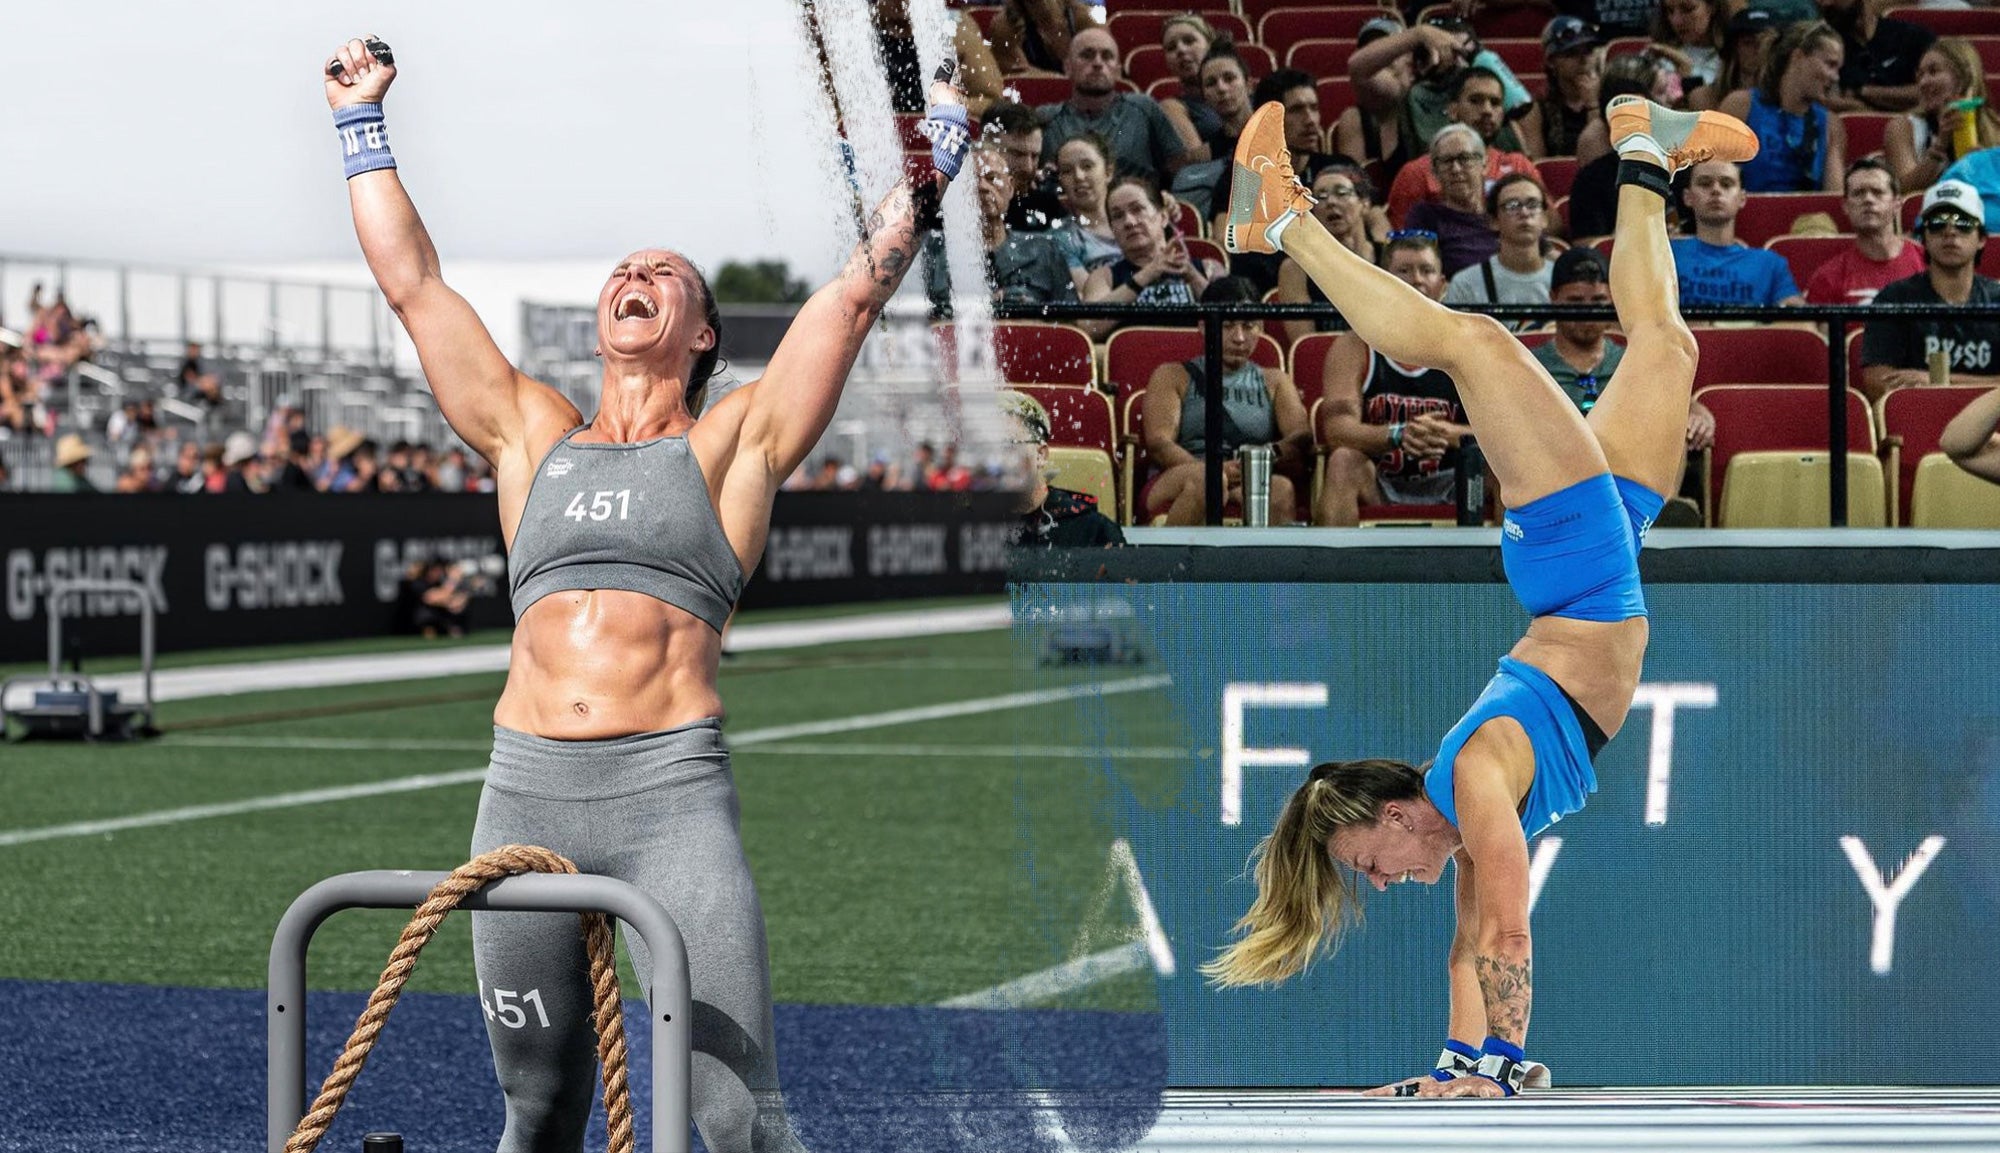 Kelly Triumphs Once More in CrossFit Games!